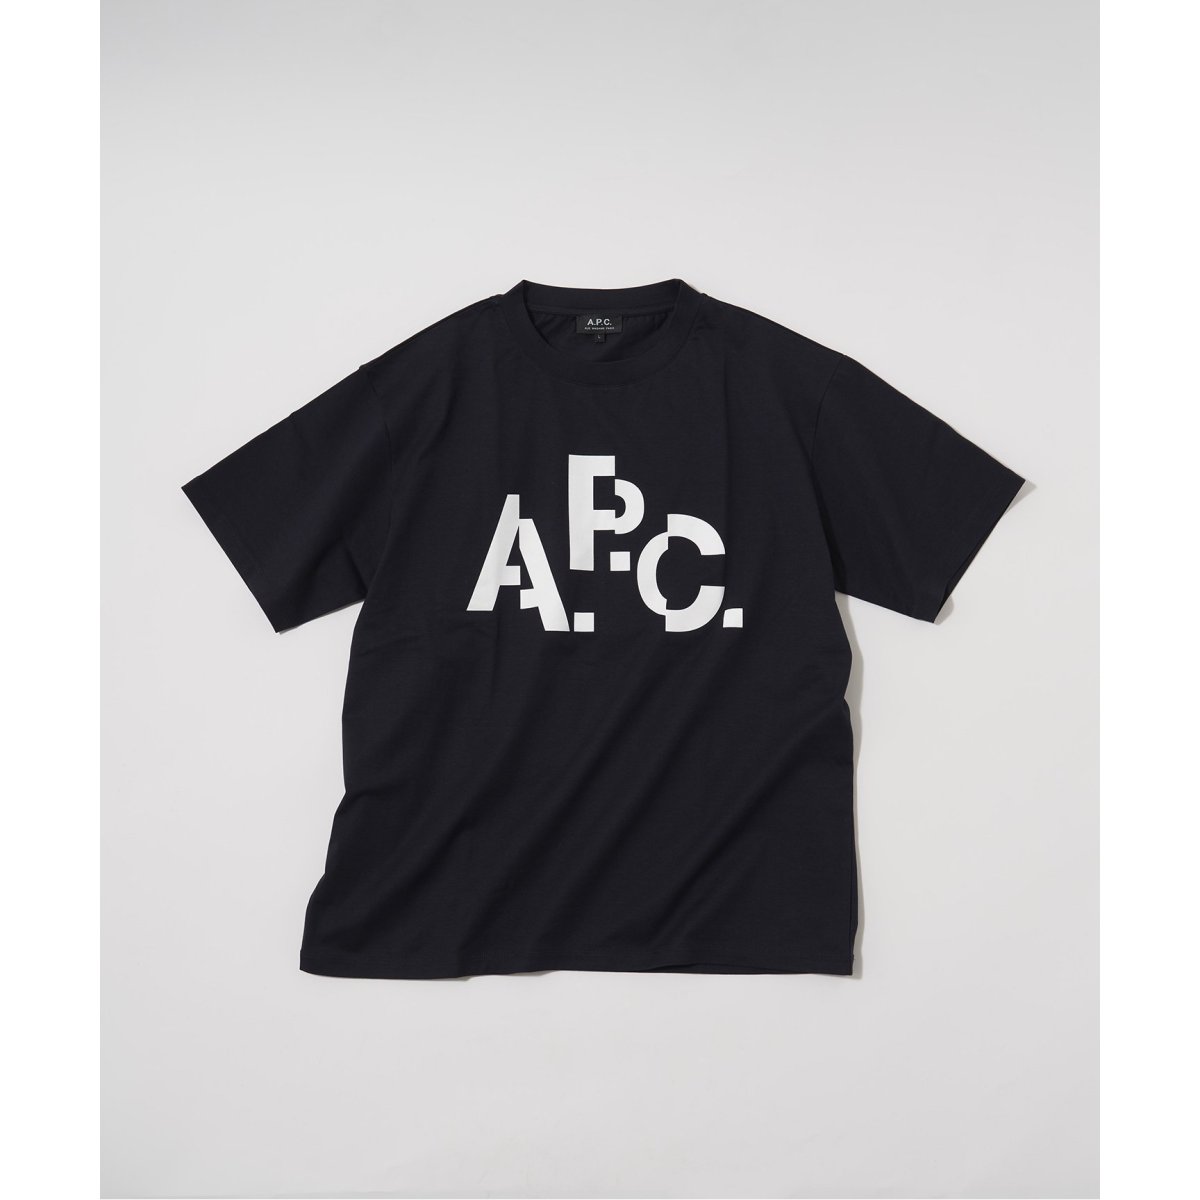 A.P.C. / アーペーセー】別注 DECALE プリント Tシャツ | エディフィス ...